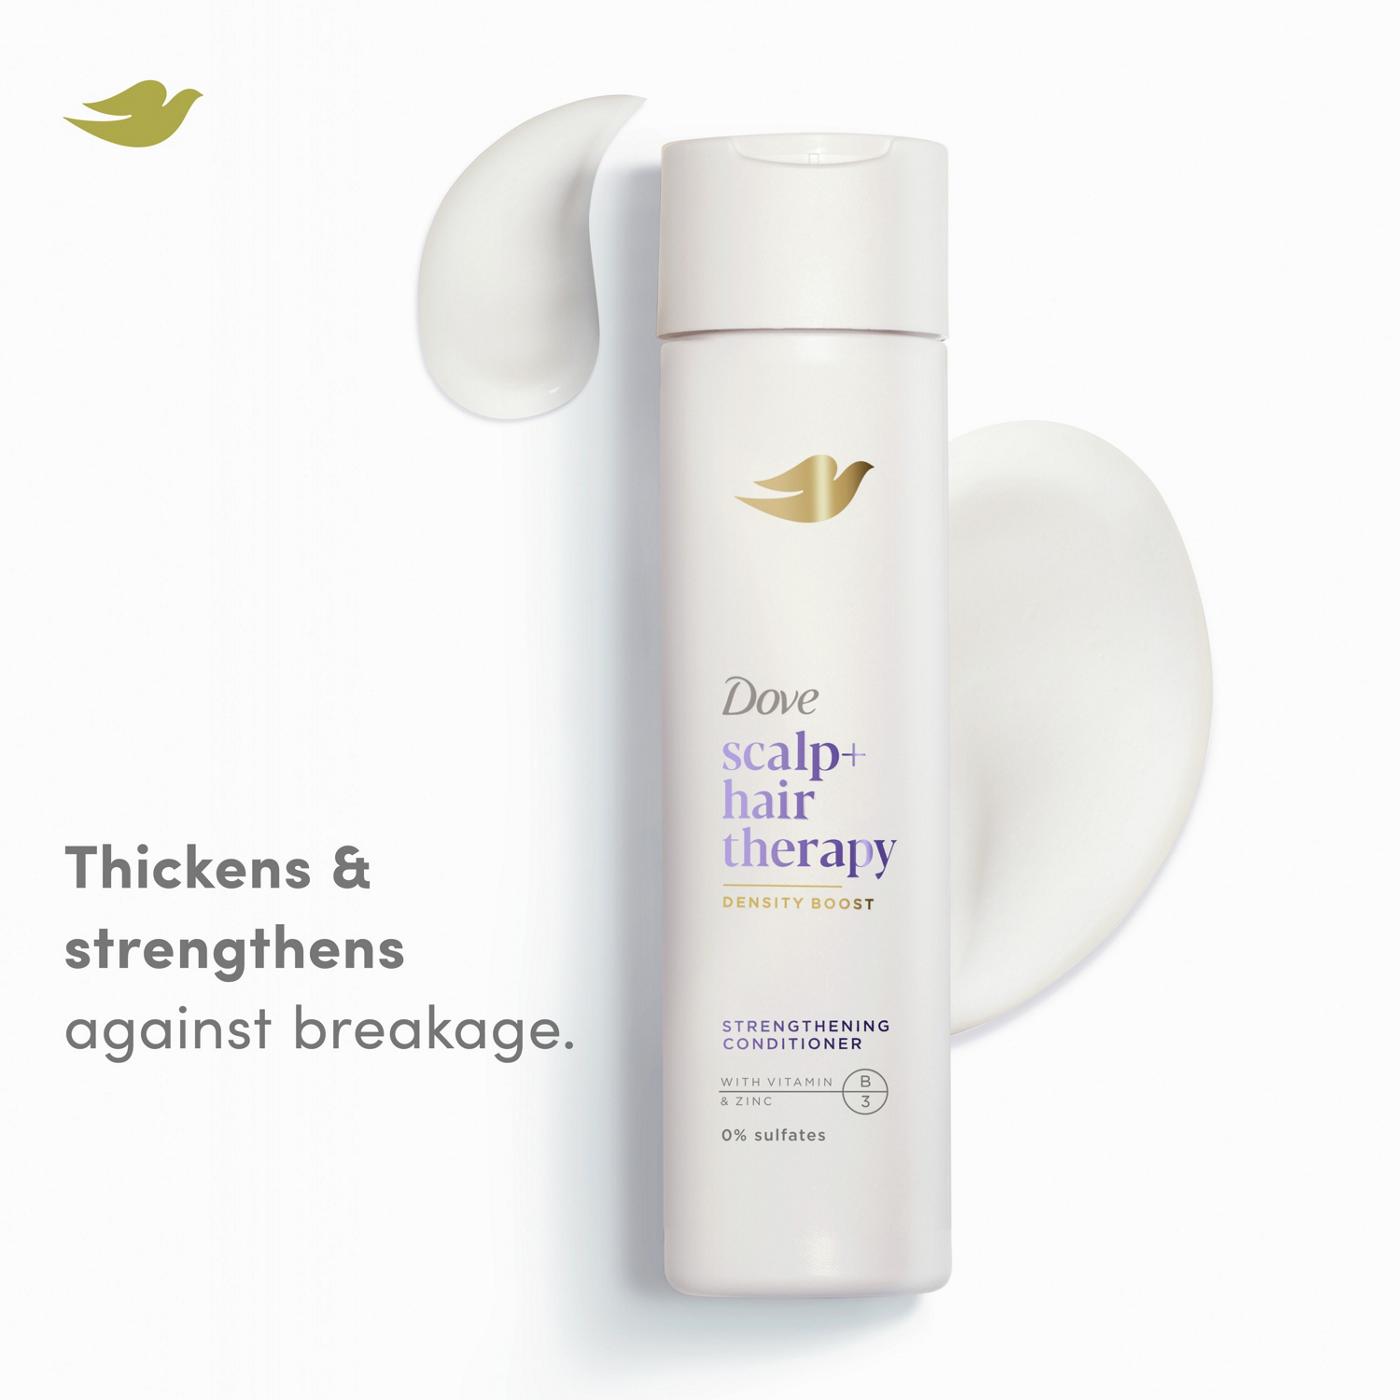 Dove Scalp+ Hair Therapy Strengthening Conditioner; image 3 of 5